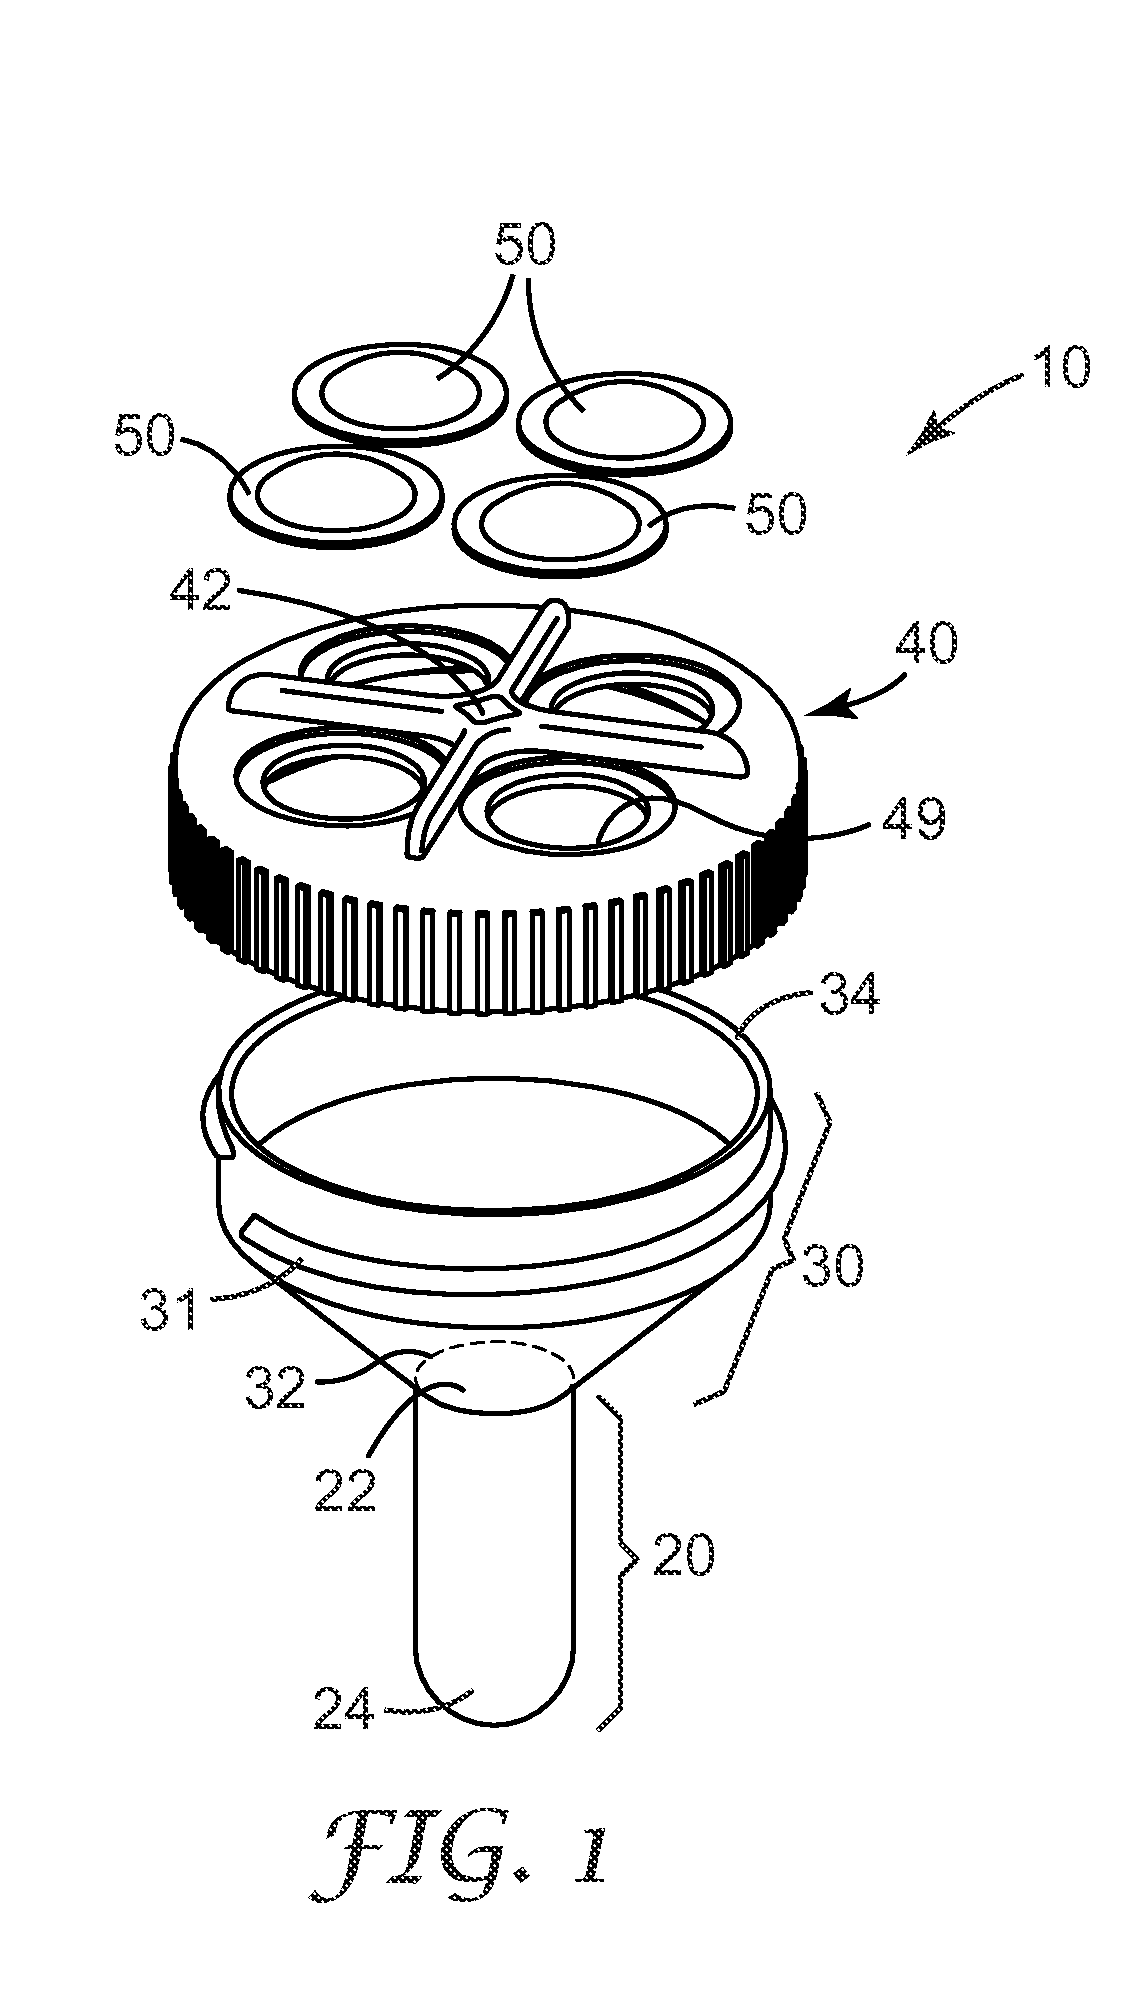 Devices and methods for dispensing reagents into samples